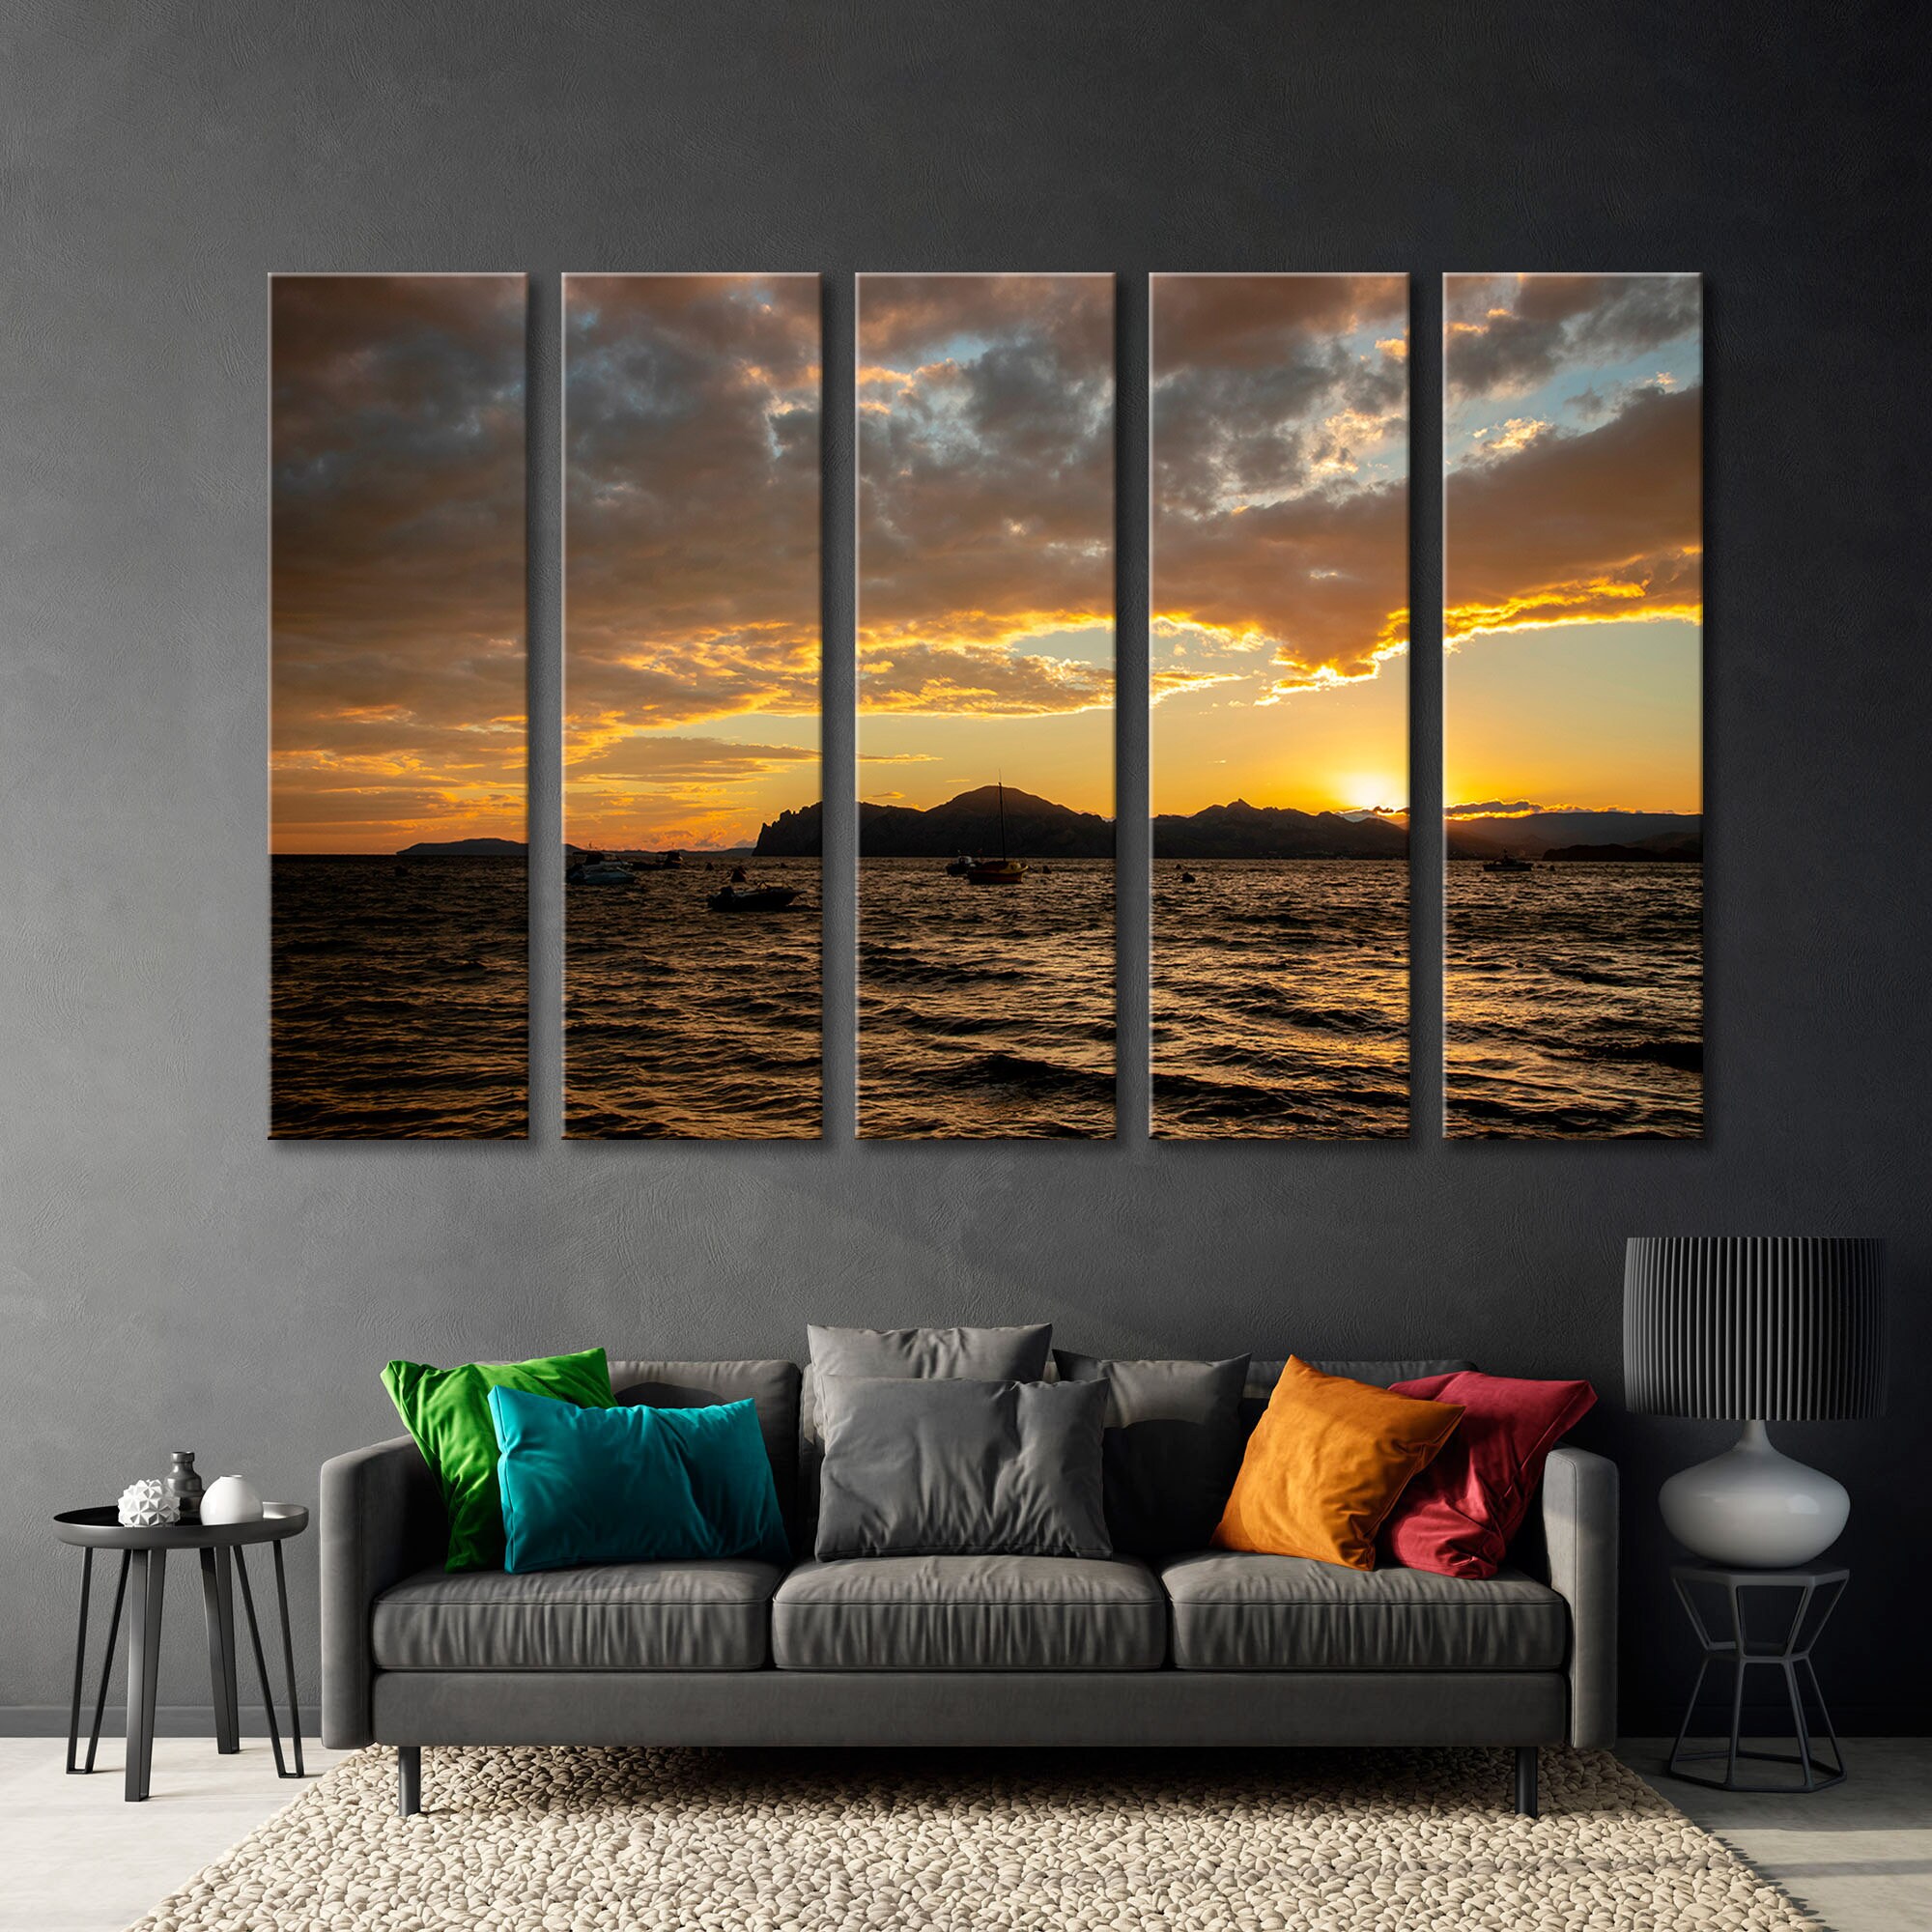 KDXAOBEI Wall Art Decor Canvas Painting Landscape Sky Couds Color Lake  Canvas Prints Seascape Sunset Paintings For Room 30x40cm(12x16in) No Frame